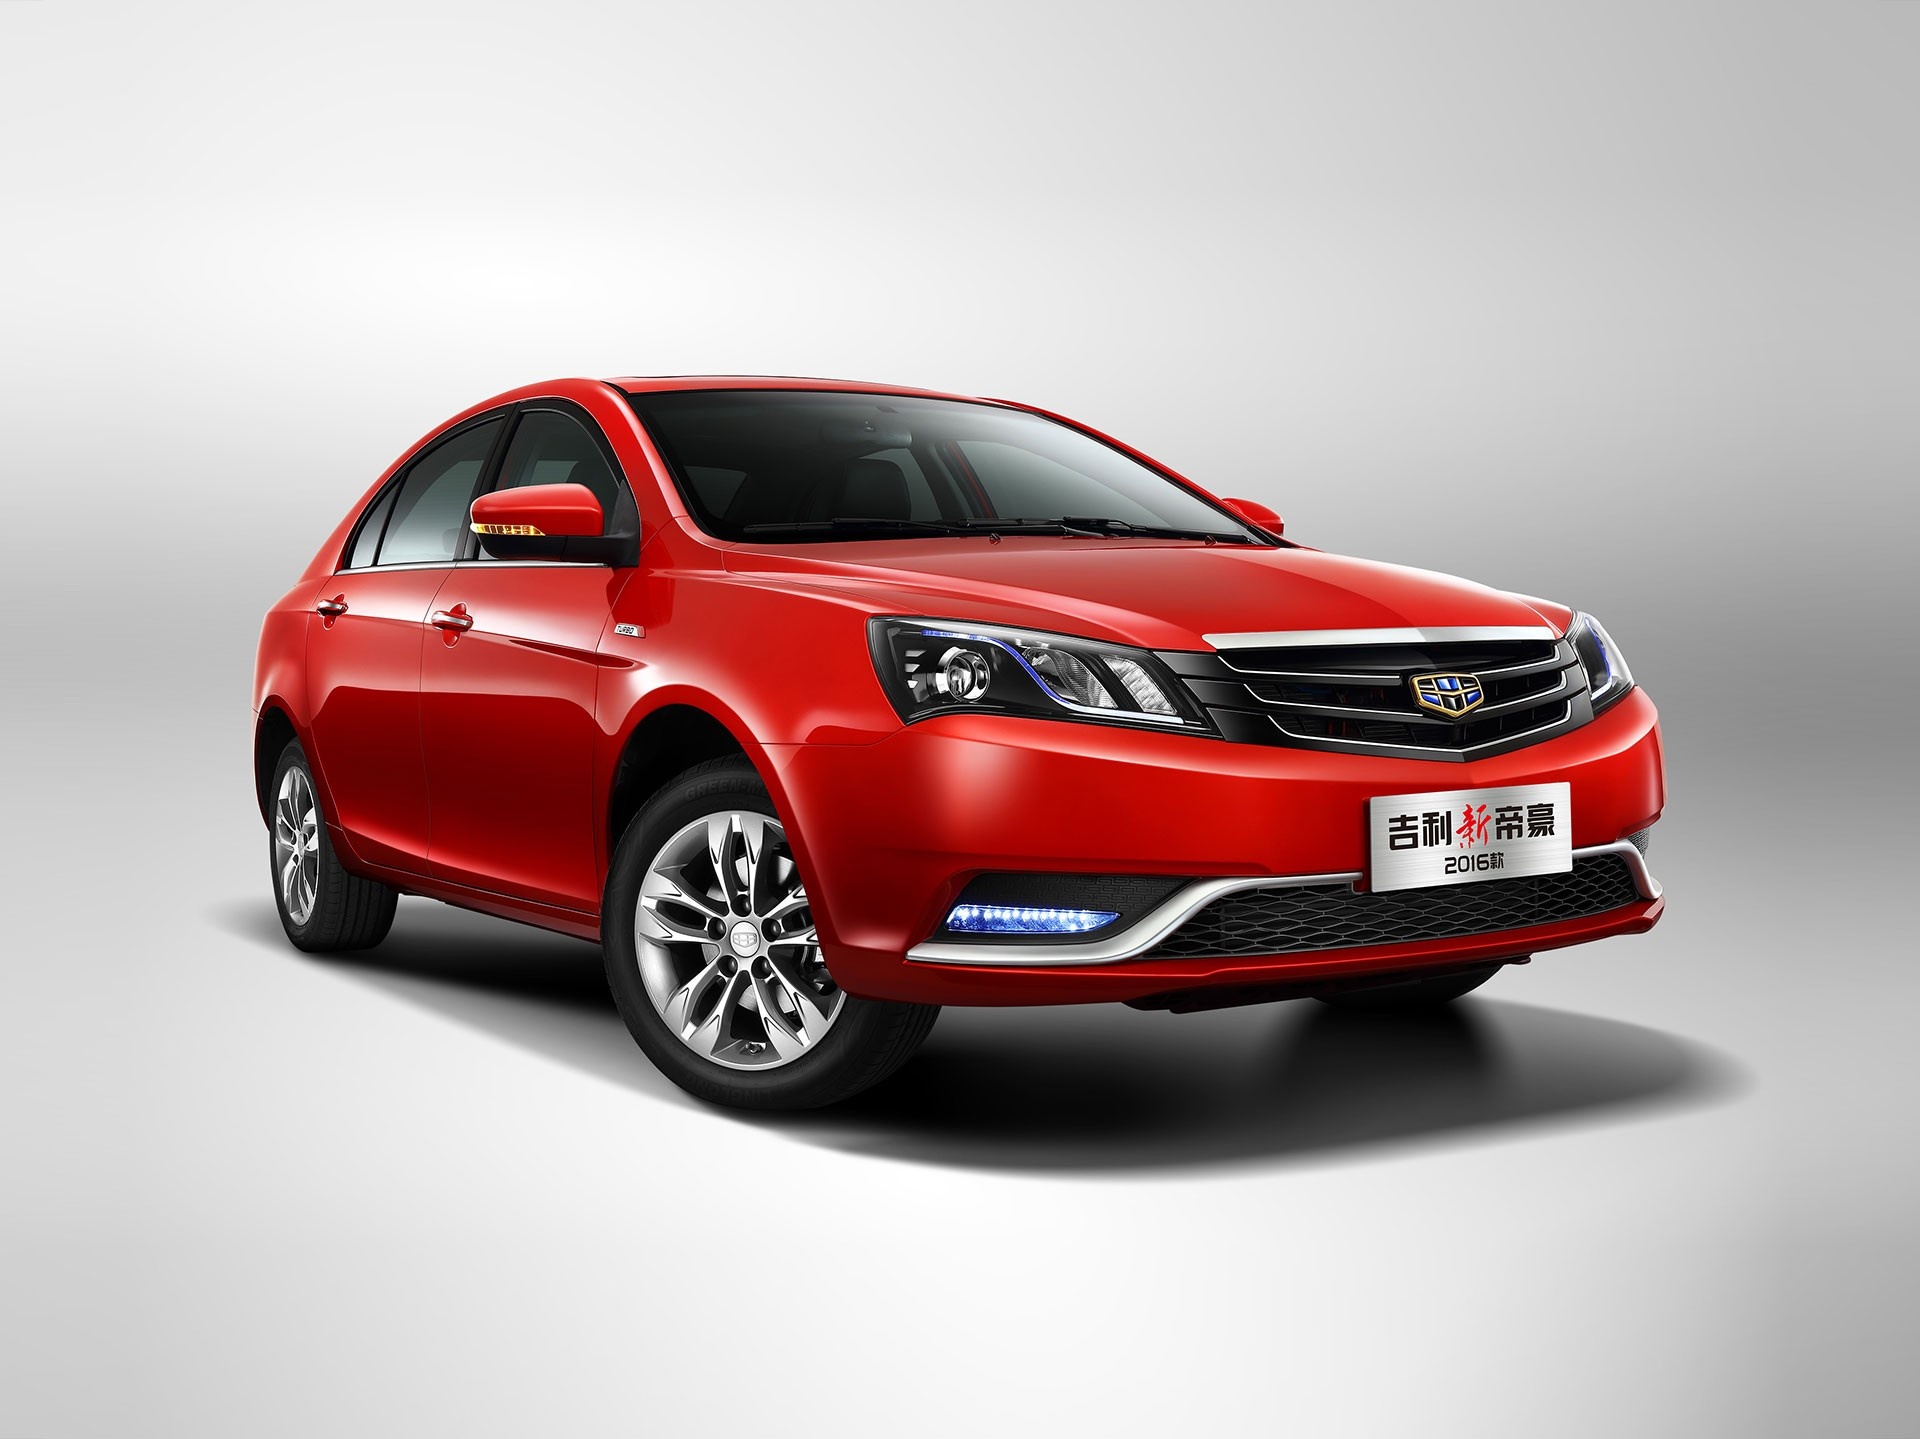 Geely Emgrand EC7, 5GE revolution, Connected mobility, Advanced technology, 1920x1440 HD Desktop